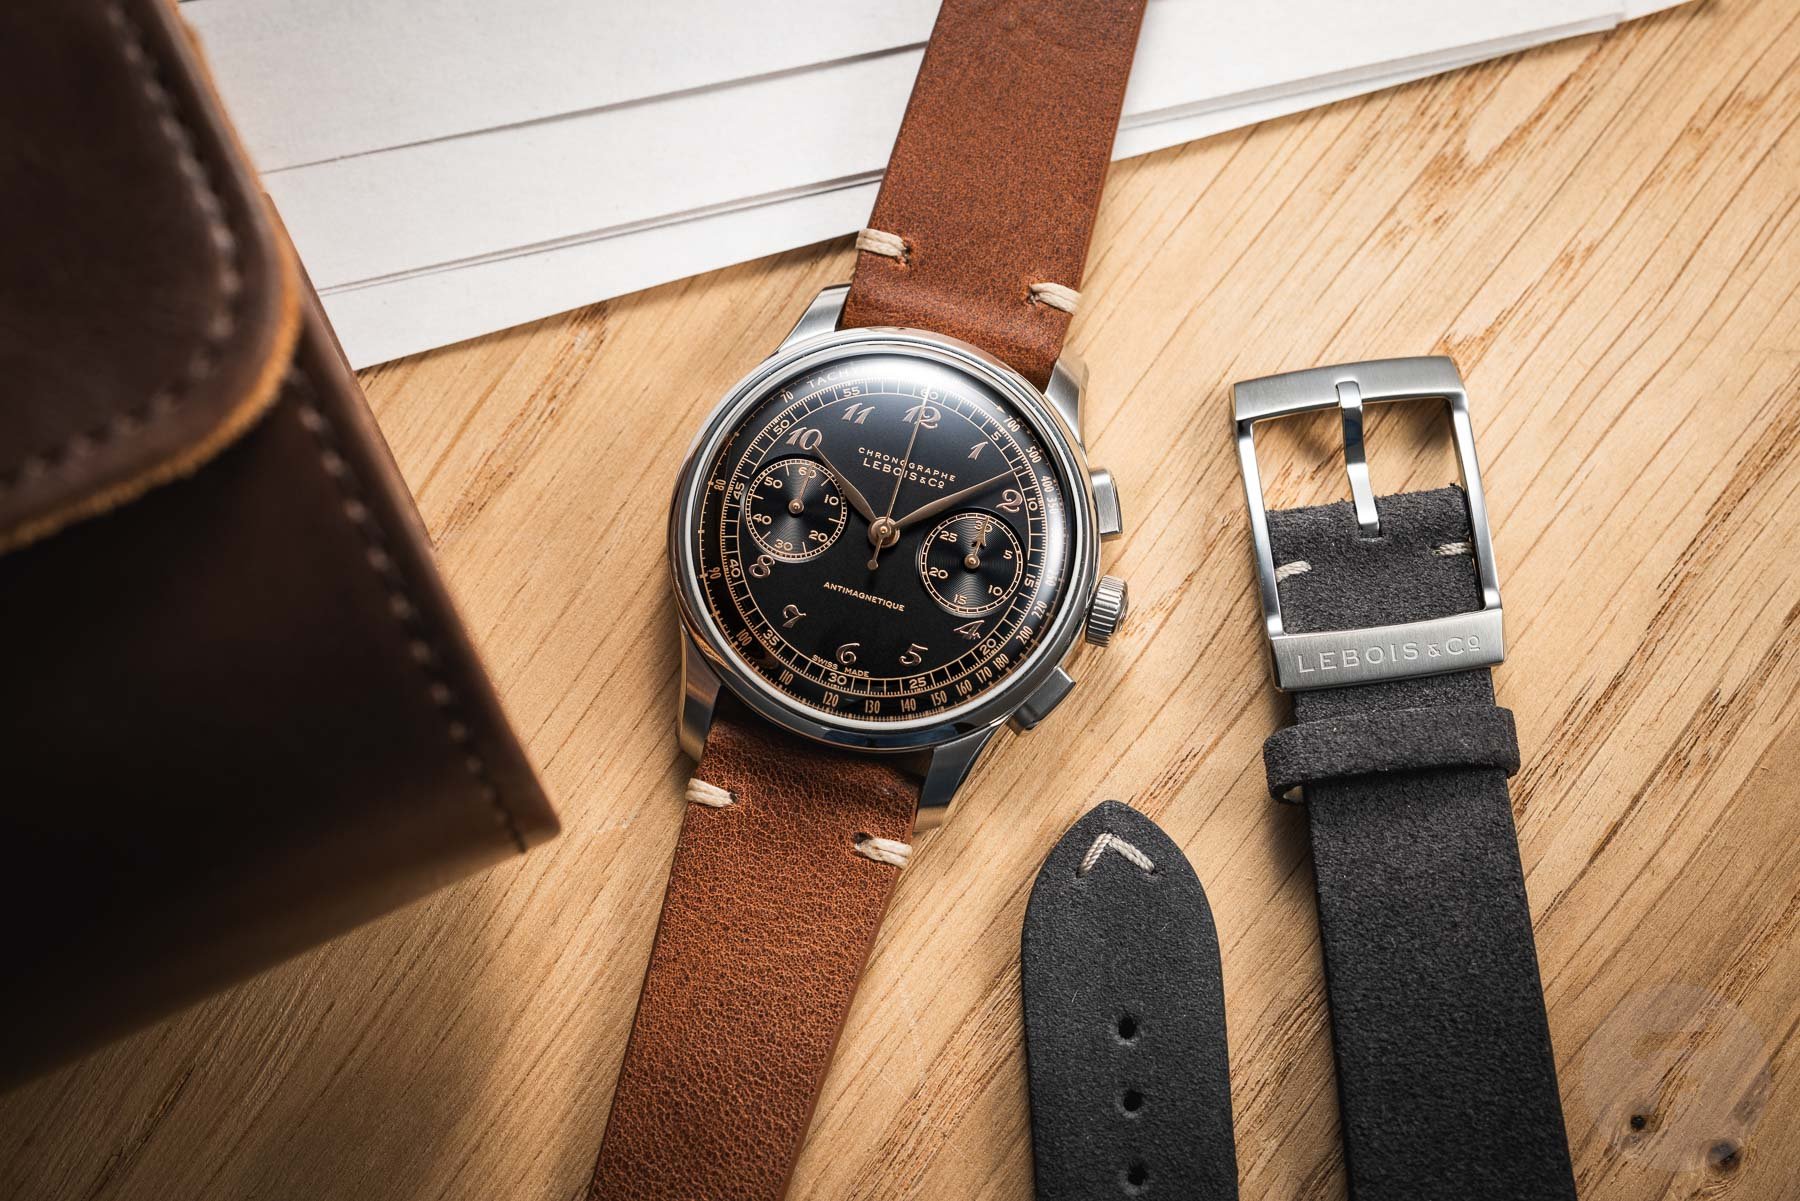 <div>Hands-On With The Lebois & Co Heritage Chronograph With A New Black And Rose Gold Dial</div>